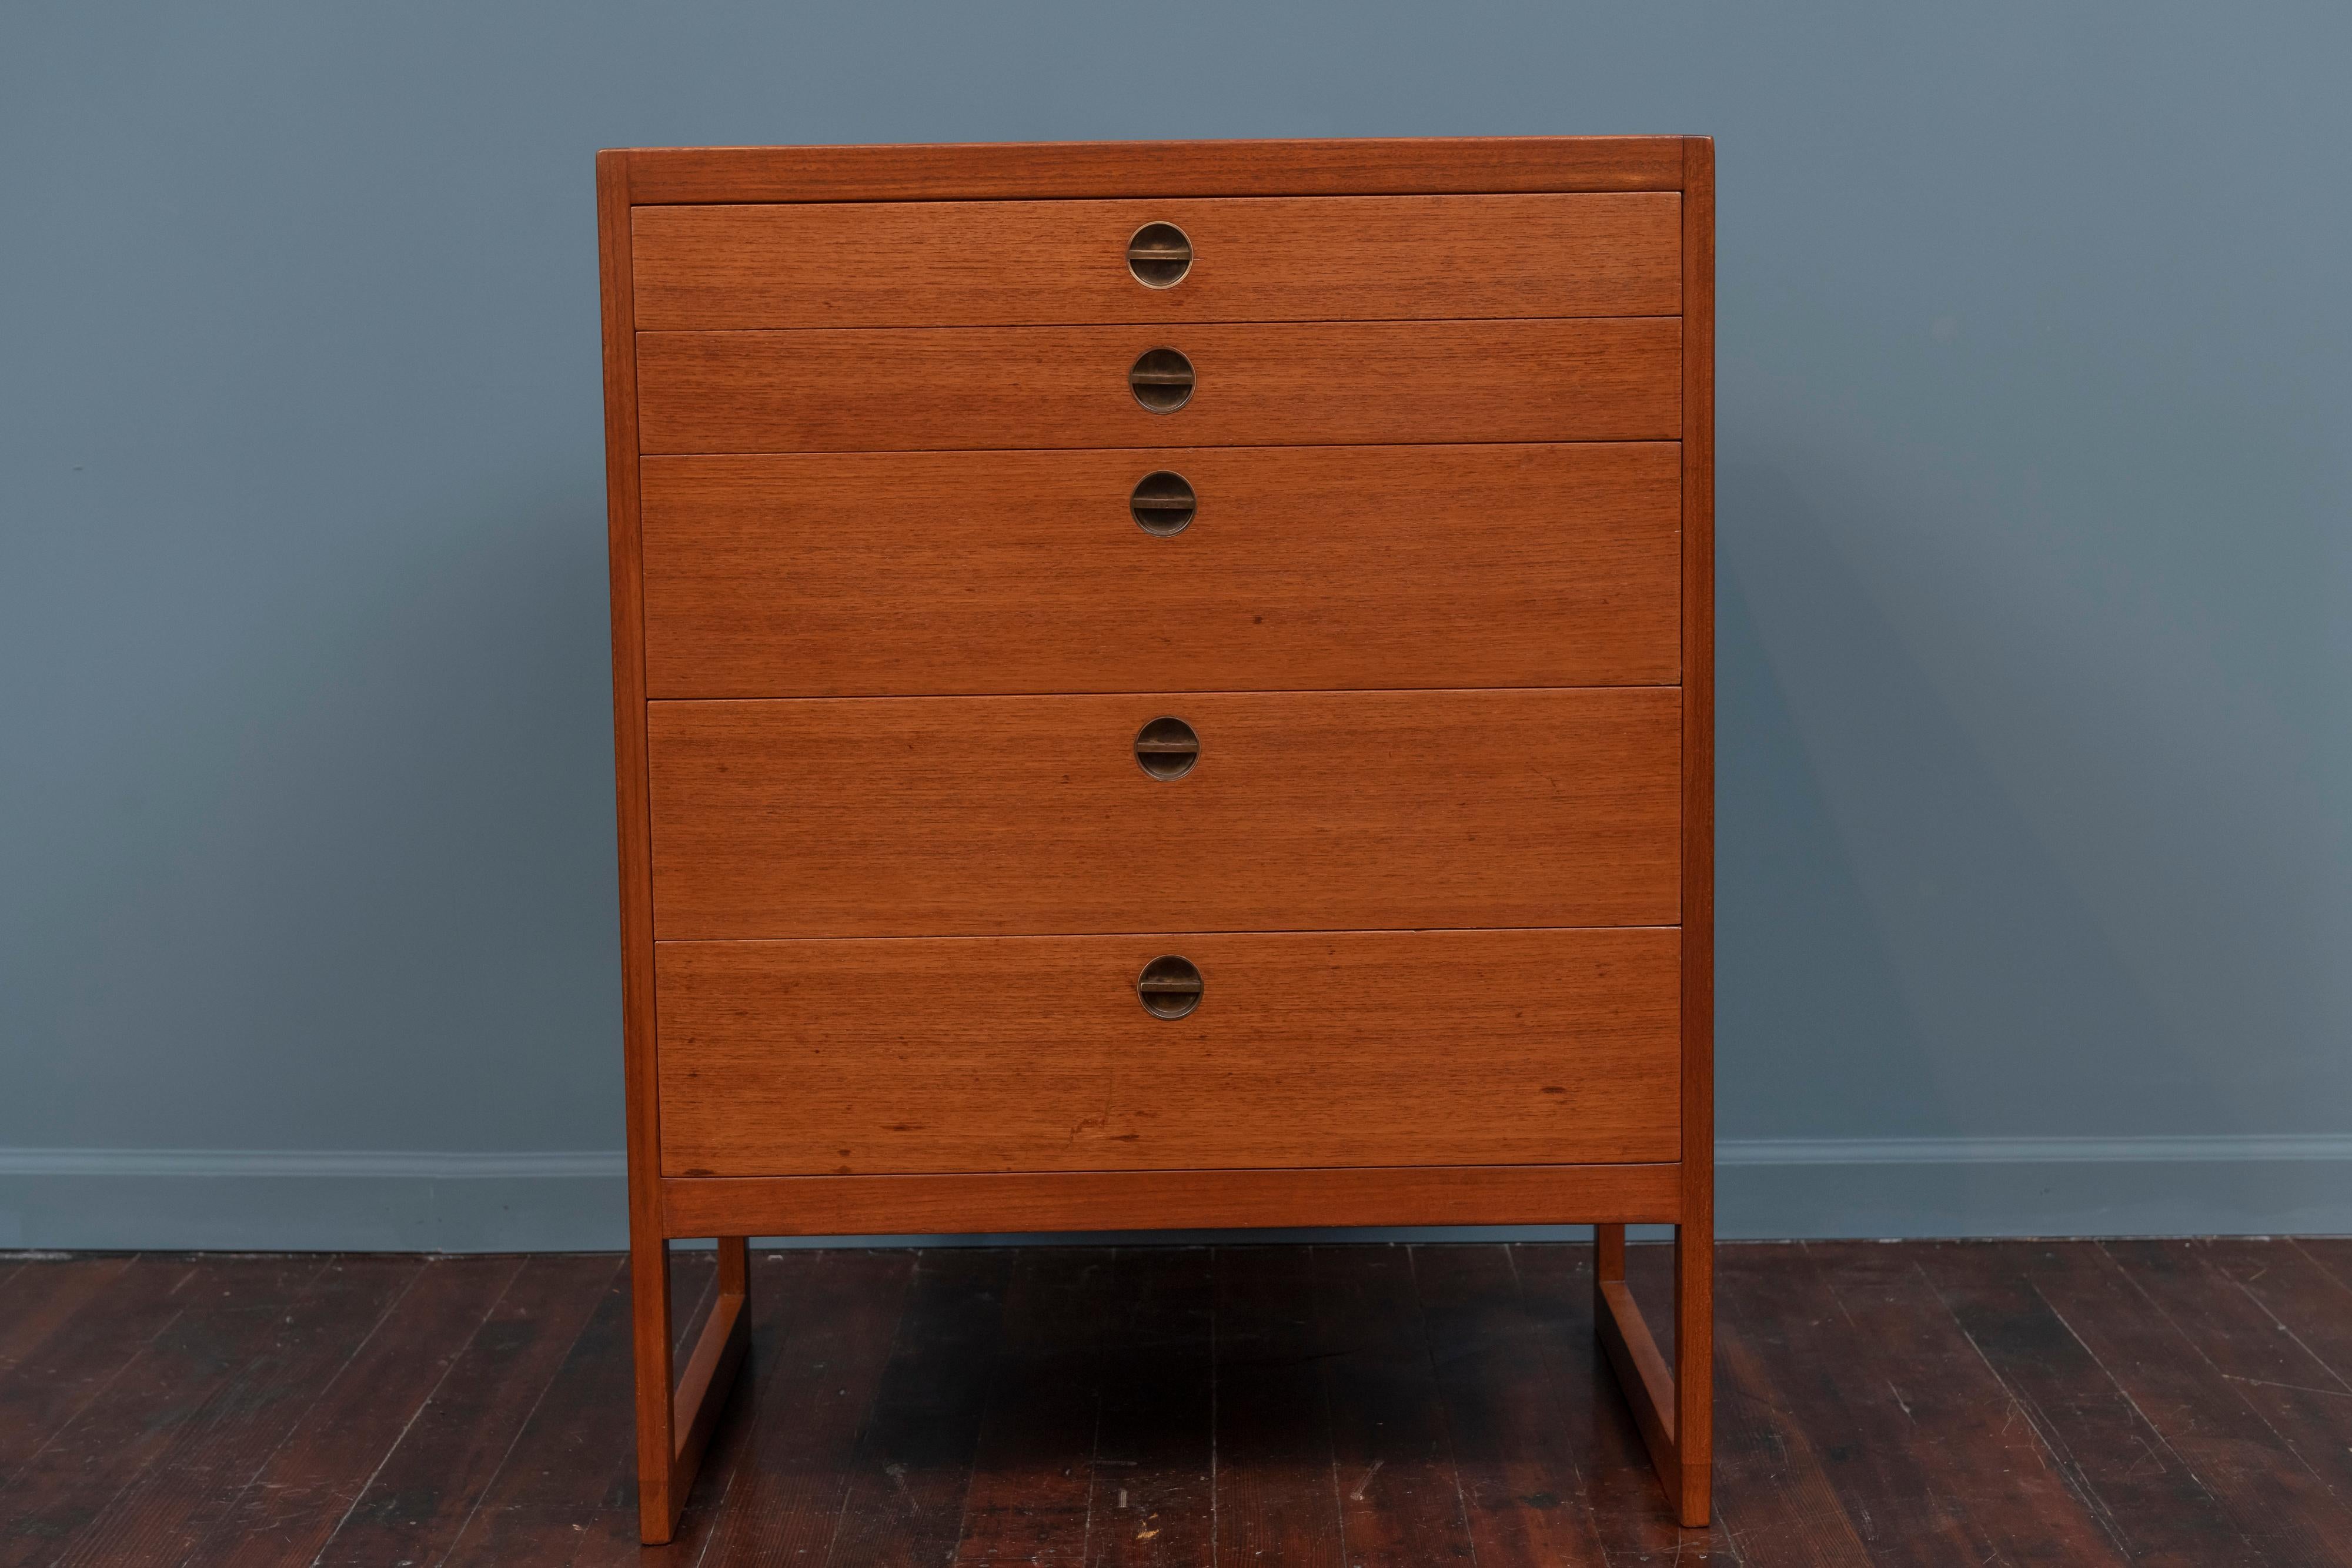 Borge Mogensen design teak and oak chest of drawers for P. Lauritsen and Son, Denmark.
 High quality design and construction featuring 5 drawers with inset solid brass pulls and newly refinished.